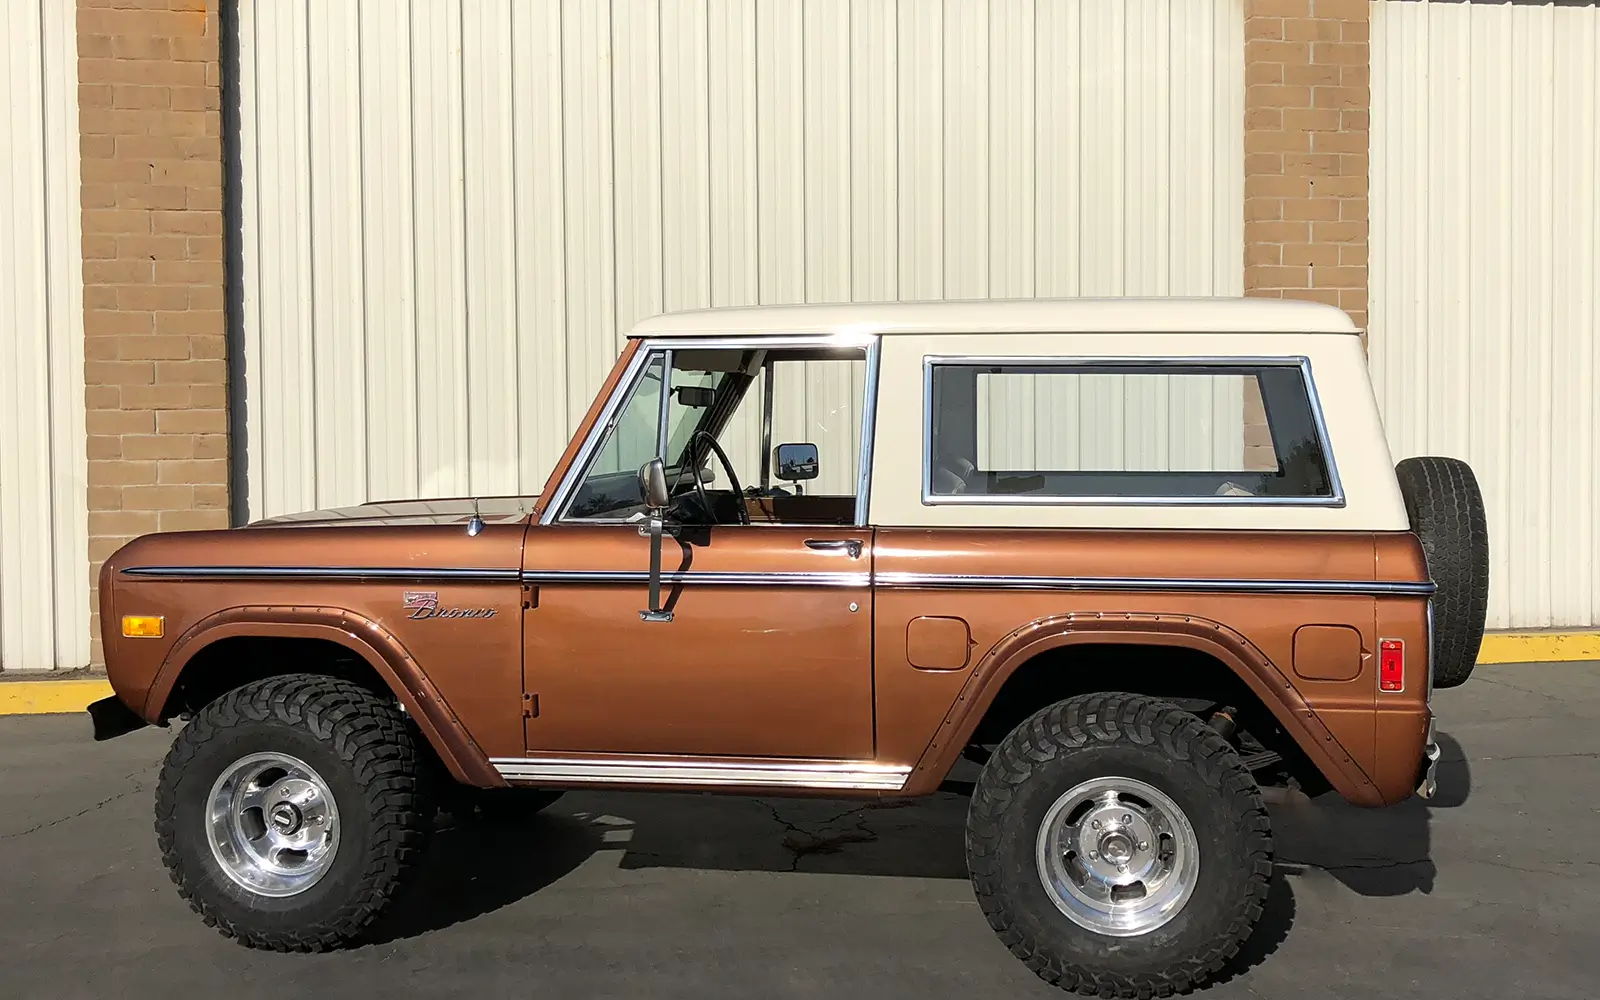 Early Bronco 1.5" Suspension Lift Kit